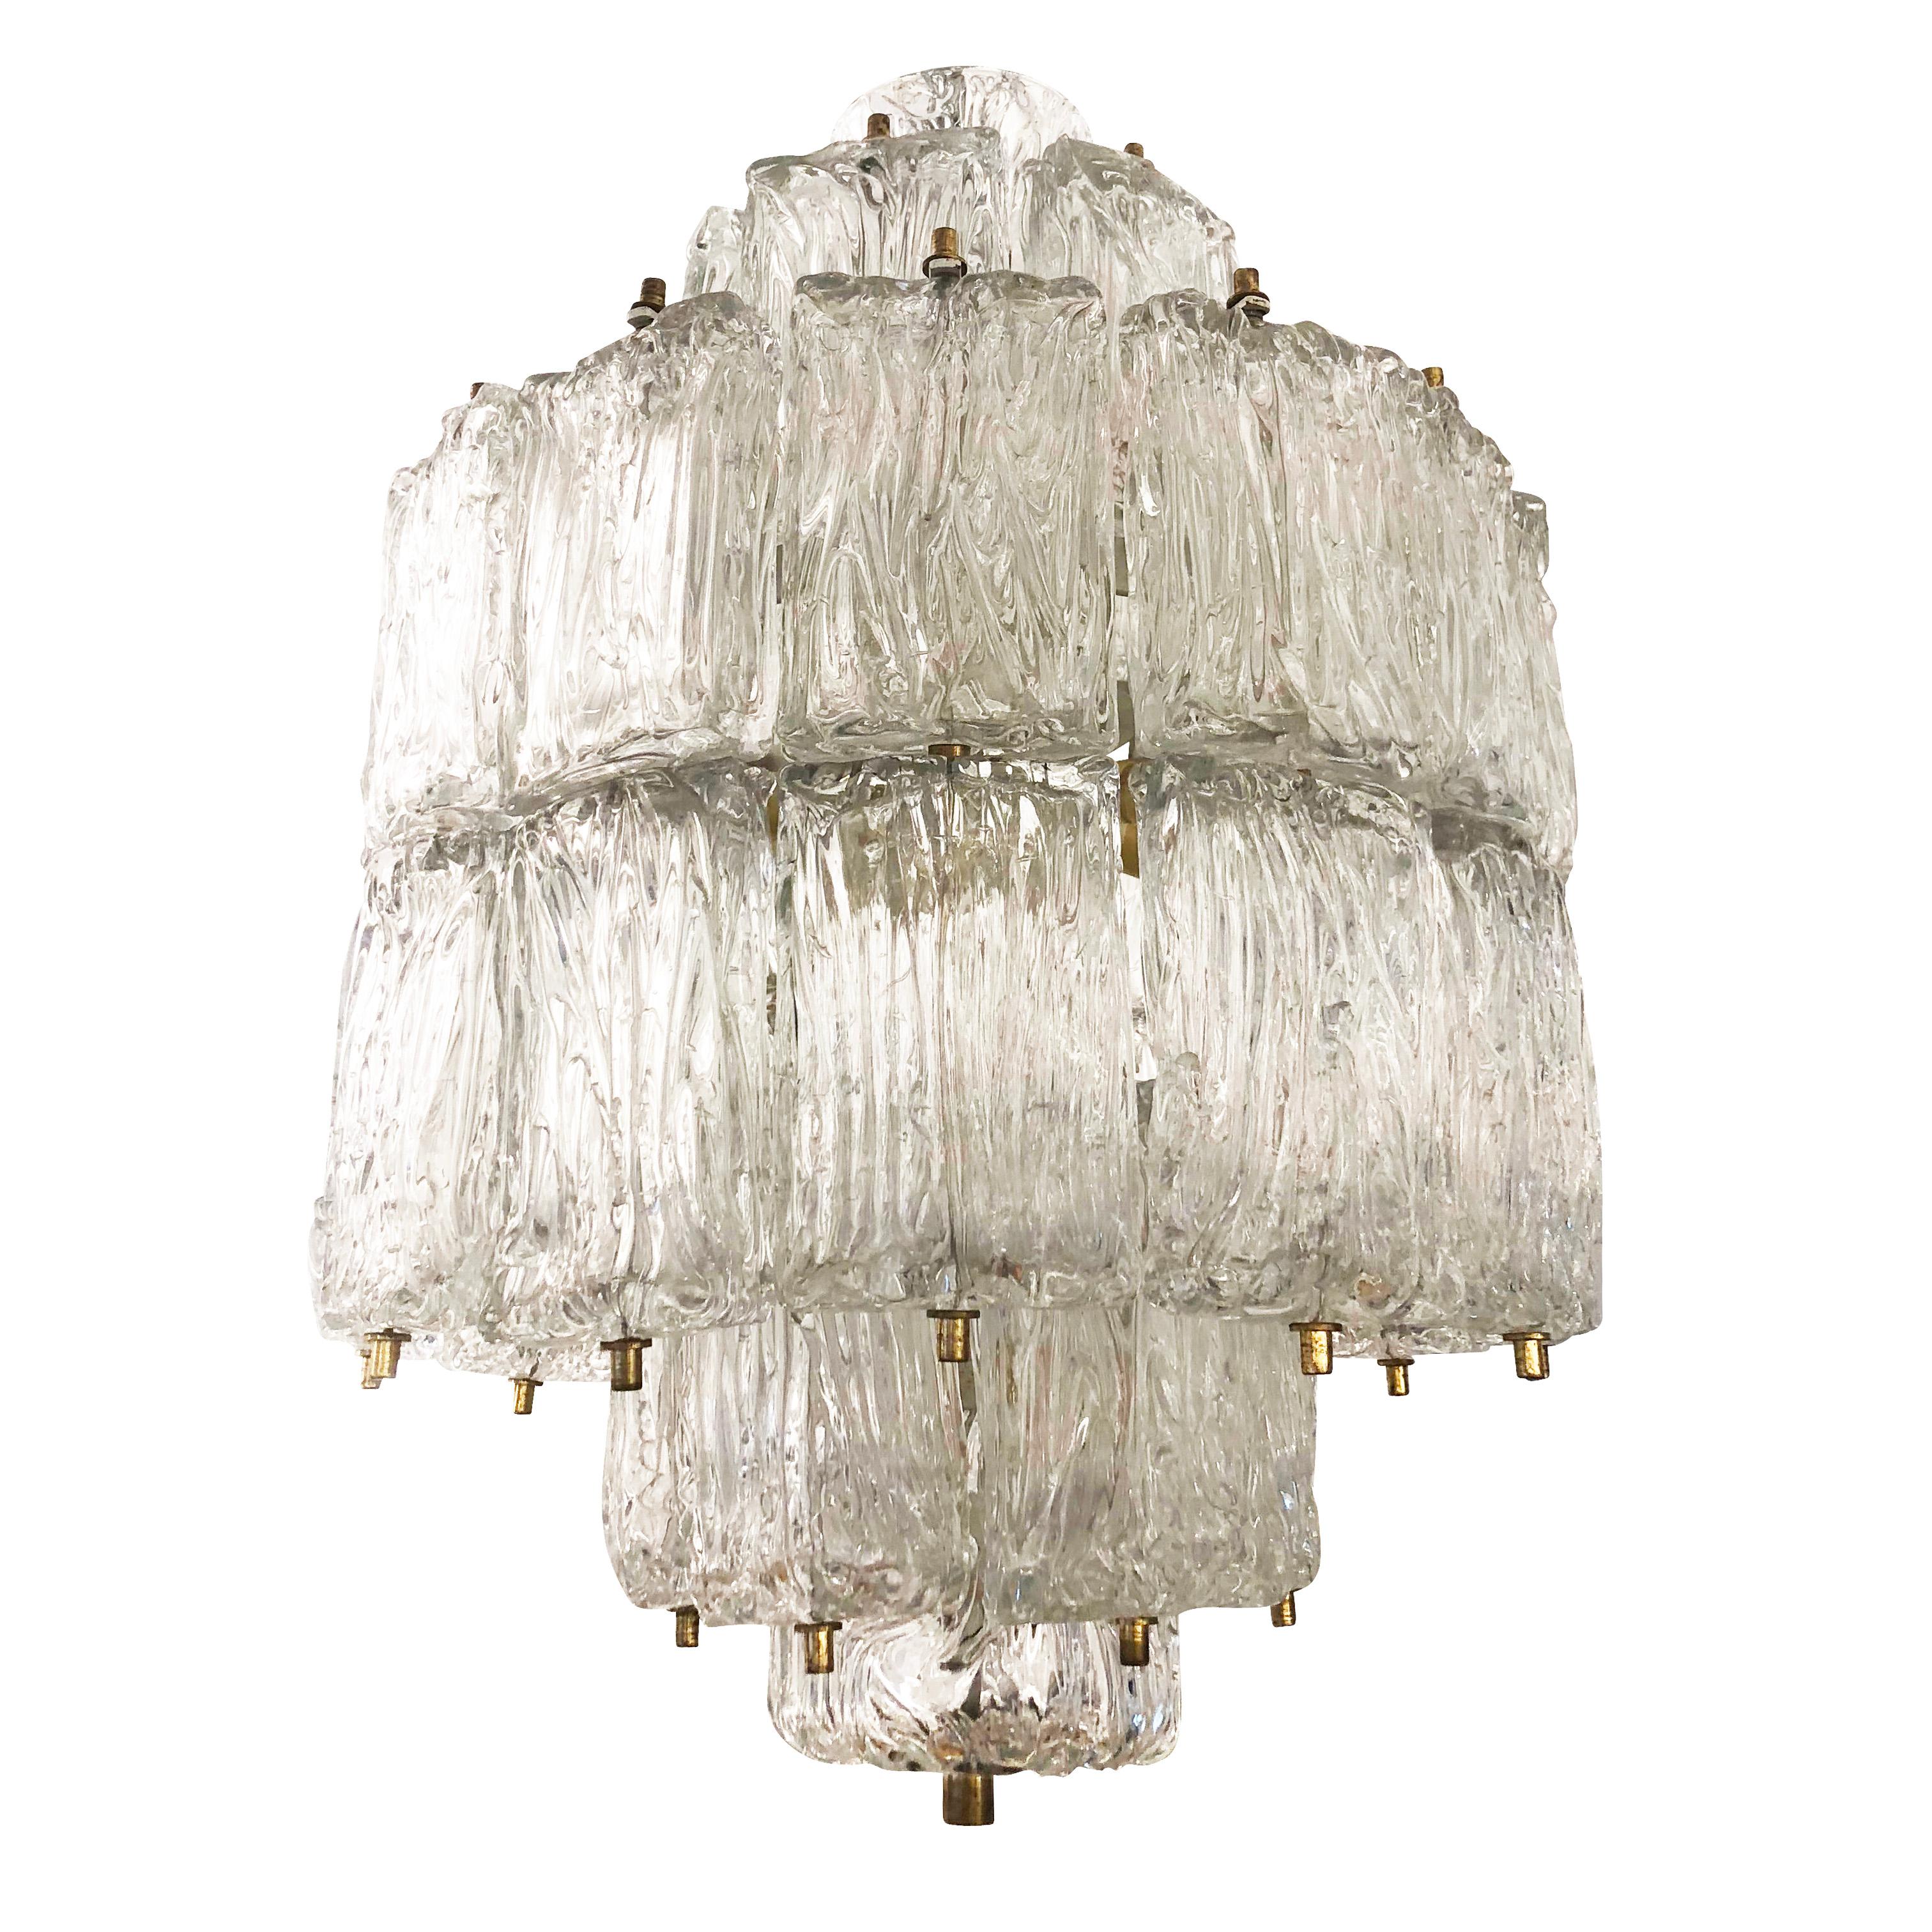 1950s Murano glass chandelier by Barovier and Toso composed of dozens of tiered textured glasses with brass fittings. Holds 12 candelabra sockets for an abundance of light. 

Condition: Excellent vintage condition, minor wear consistent with age and